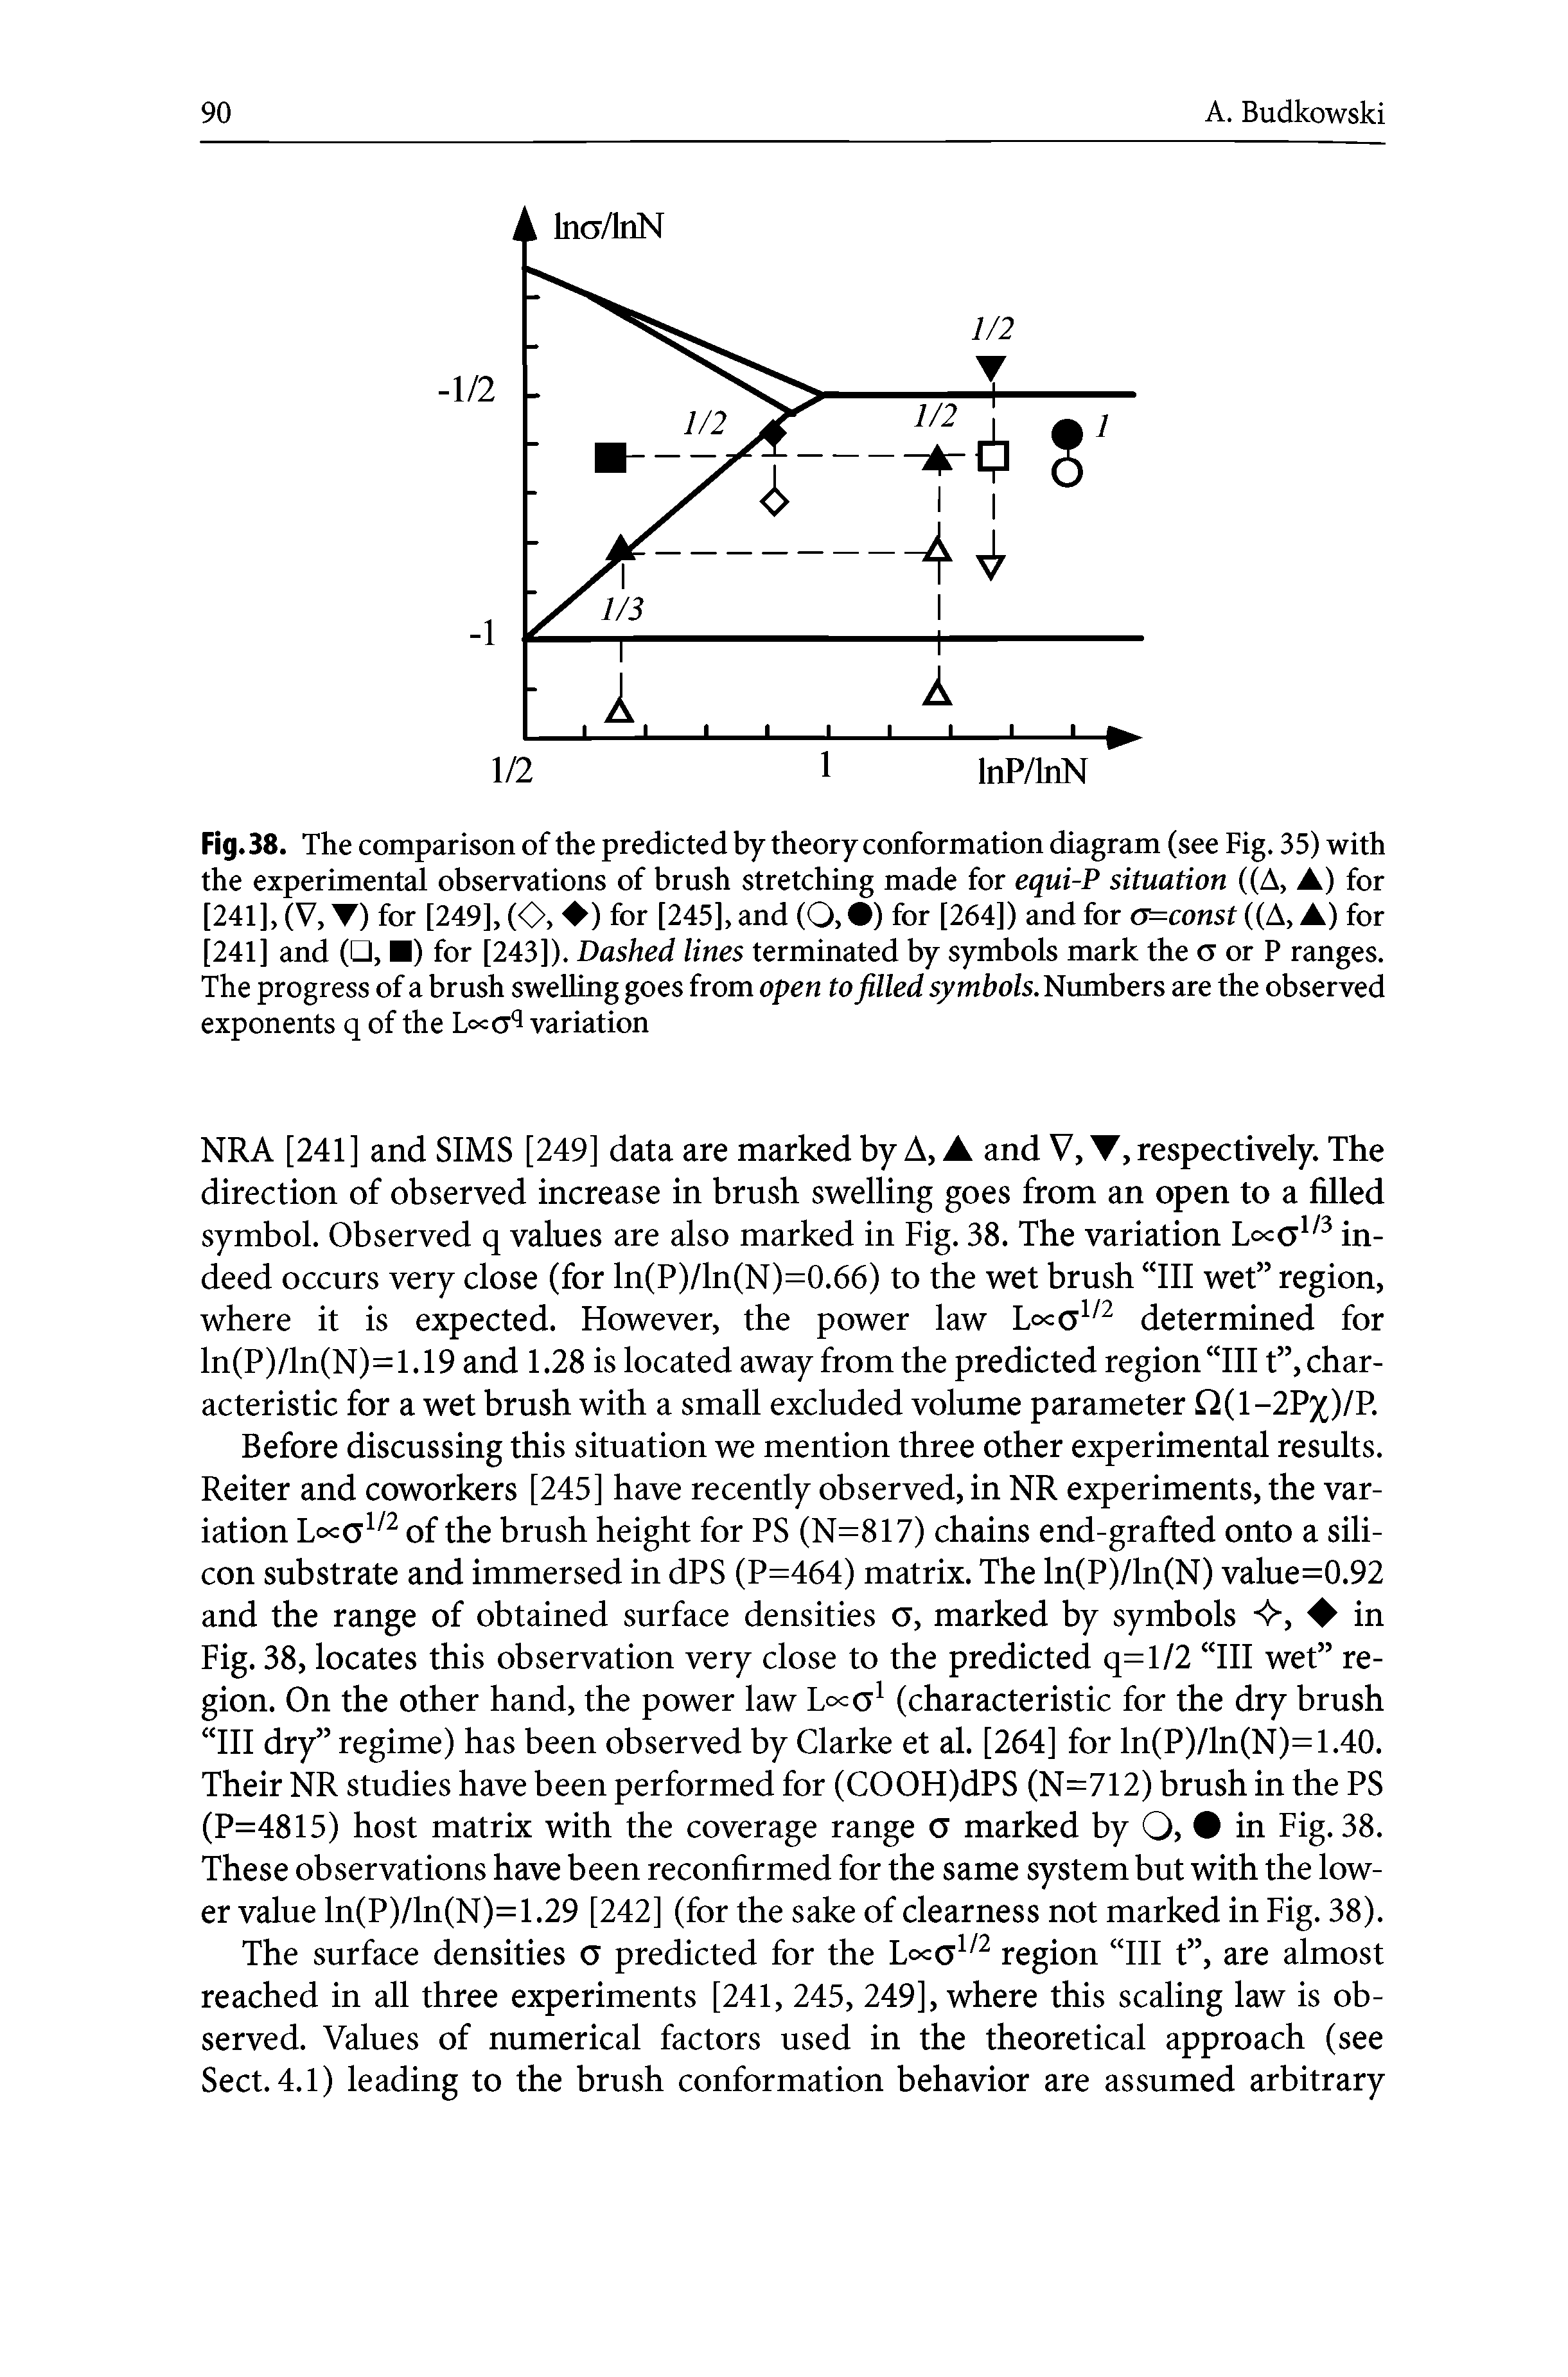 Fig. 38. The comparison of the predicted by theory conformation diagram (see Fig. 35) with the experimental observations of brush stretching made for equi-P situation ((A, ) for [241], (V, ) for [249], (O, ) for [245], and (O, ) for [264]) and for a=const ((A, ) for [241] and ( , ) for [243]). Dashed lines terminated by symbols mark the o or P ranges. The progress of a brush swelling goes from open to filled symbols. Numbers are the observed exponents q of the L°=aq variation...